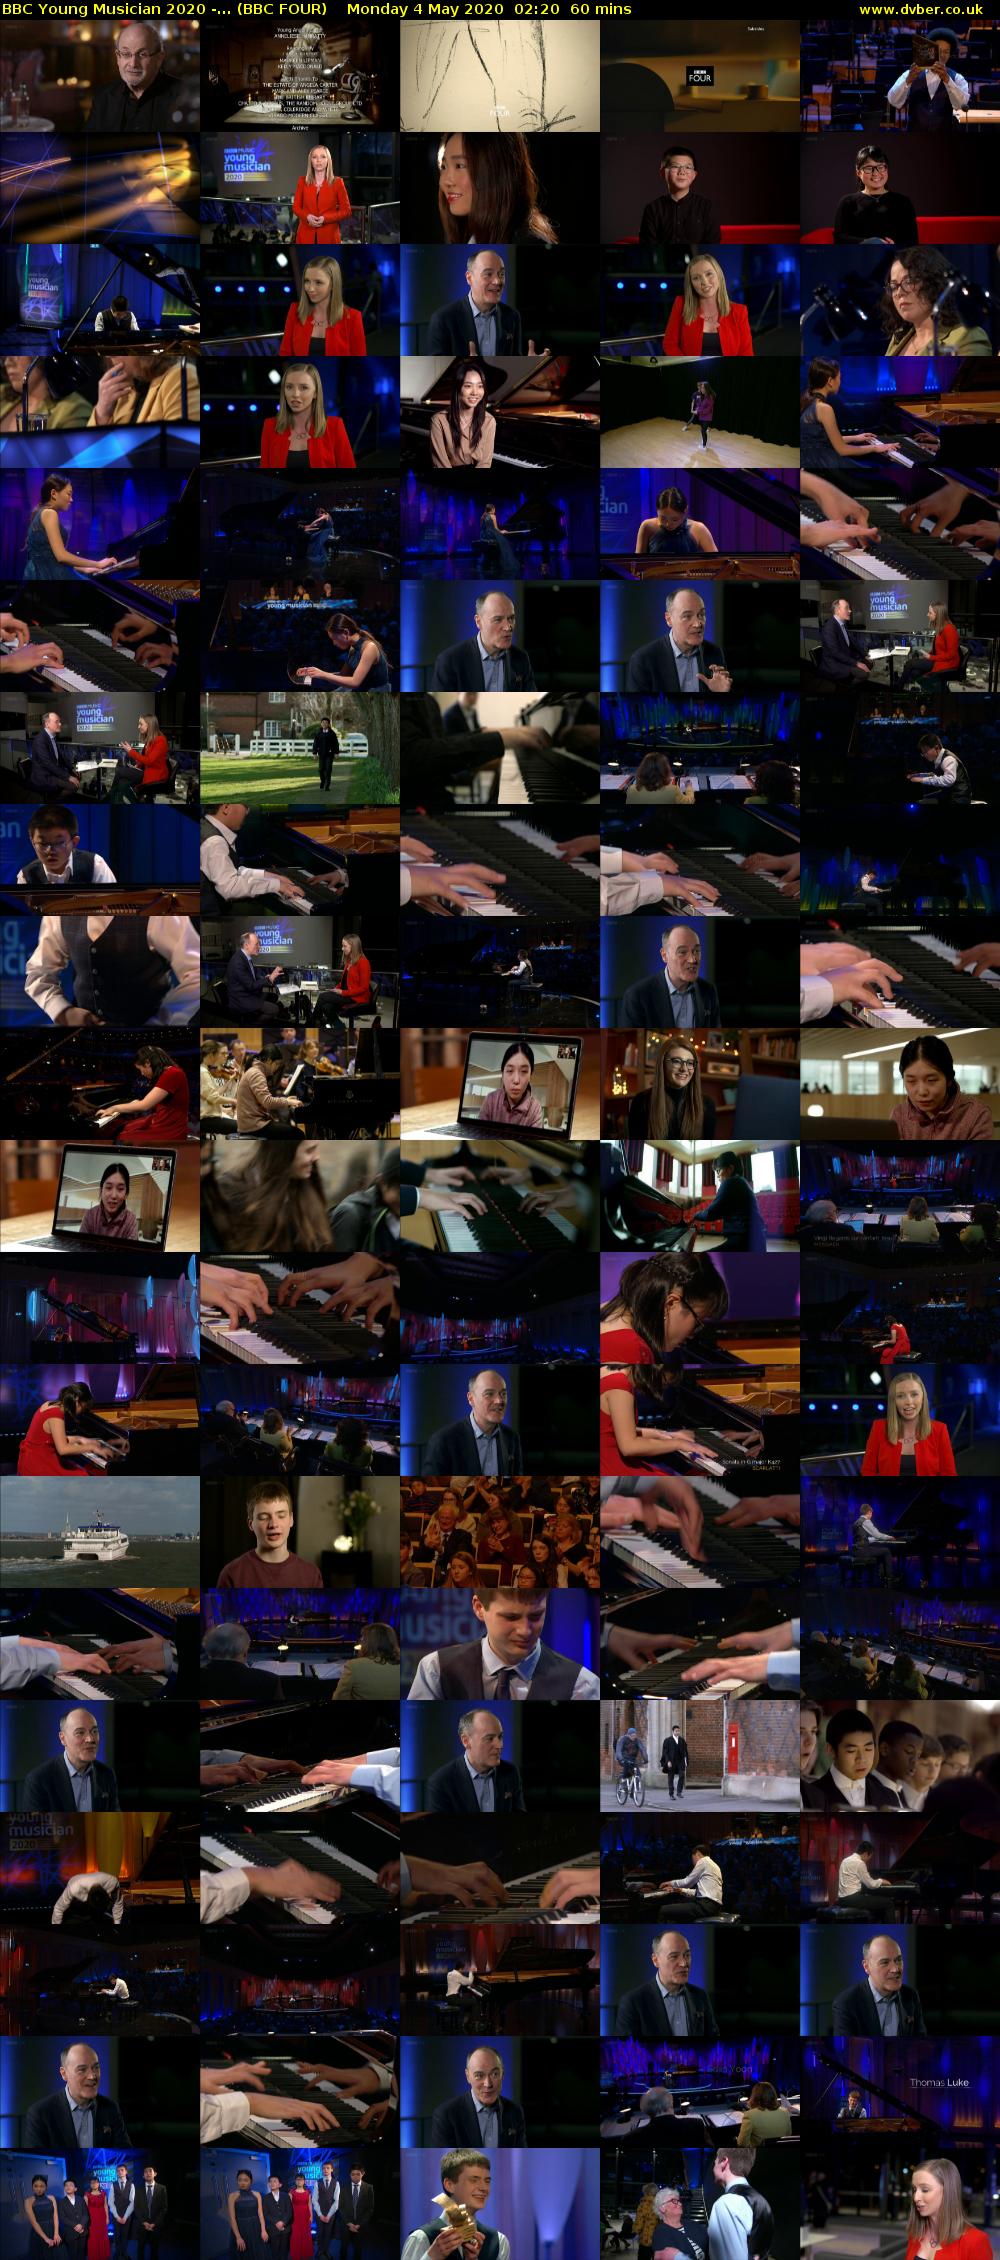 BBC Young Musician 2020 -... (BBC FOUR) Monday 4 May 2020 02:20 - 03:20